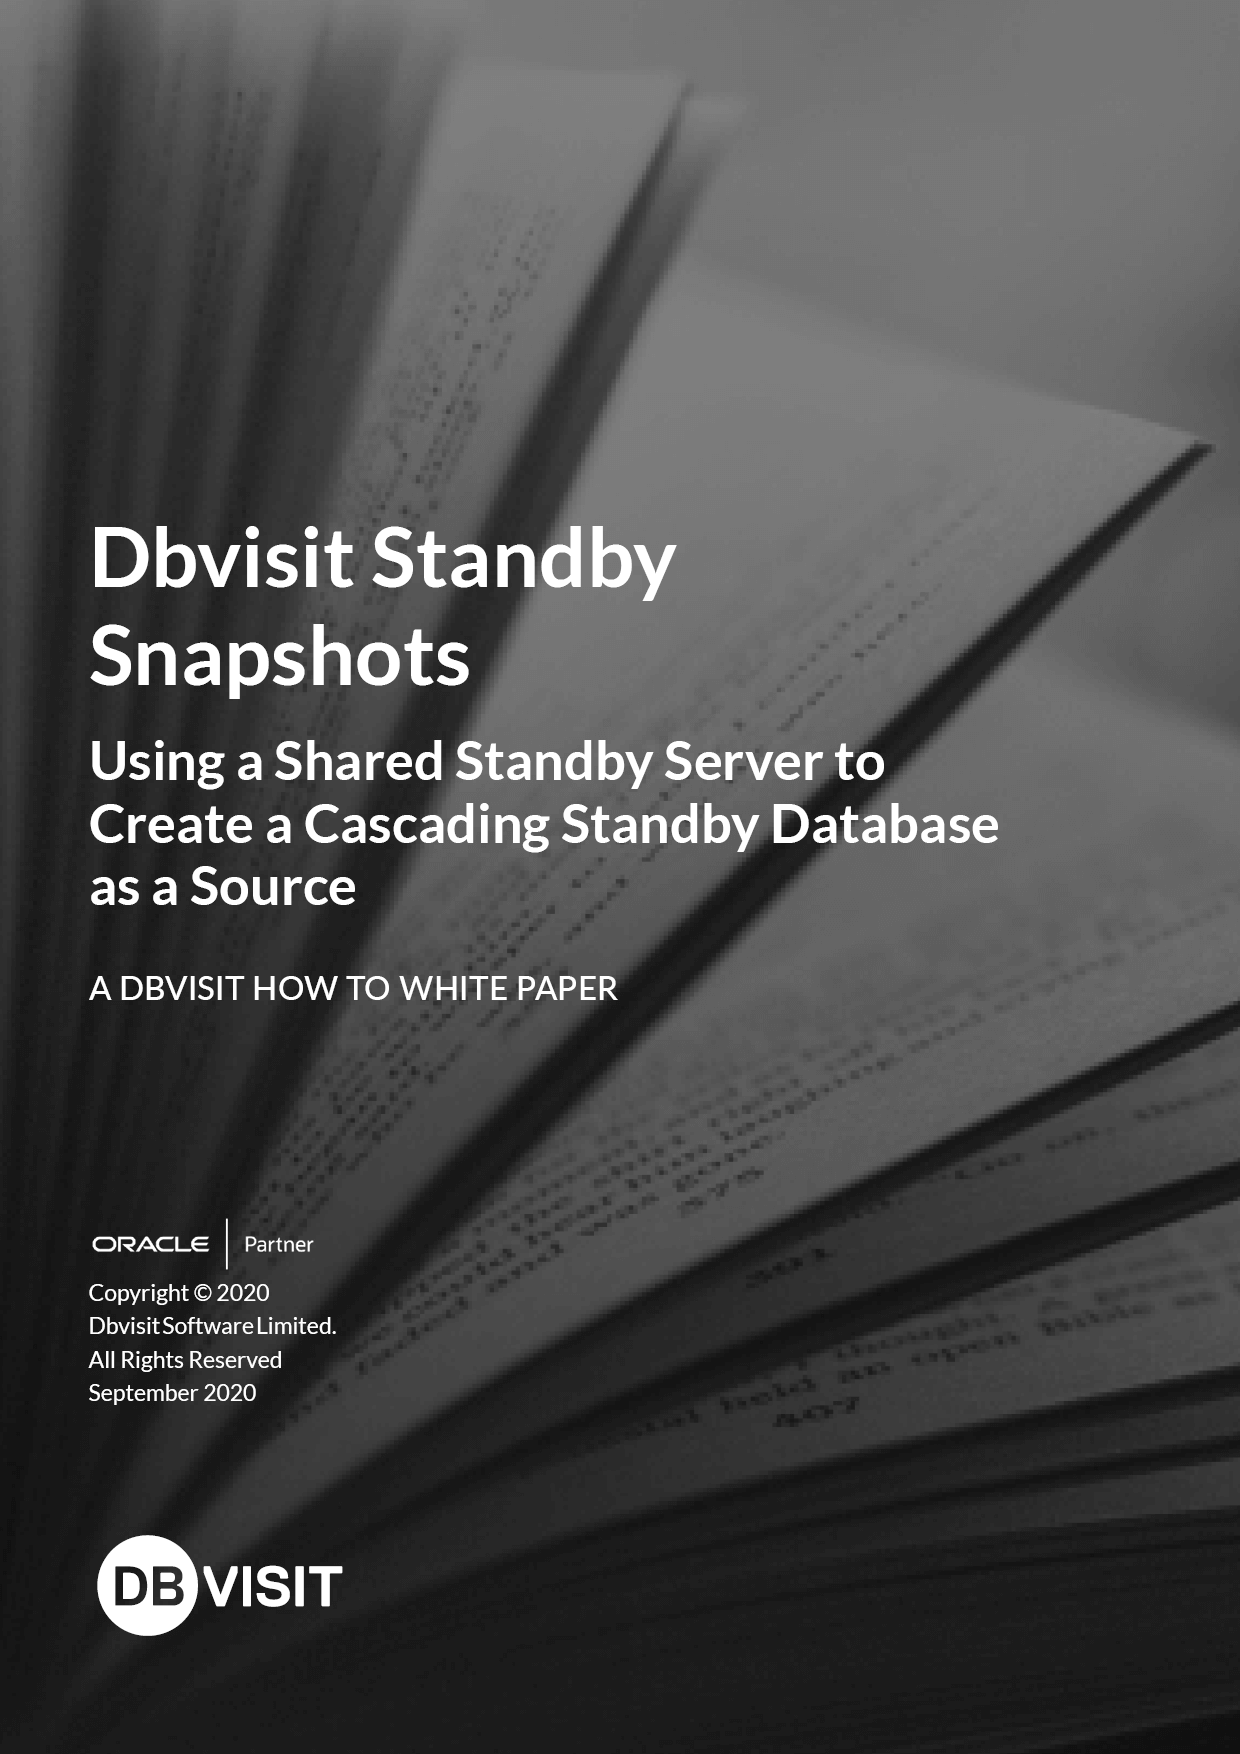 White Paper - Image - Snapshots Shared Standby Server